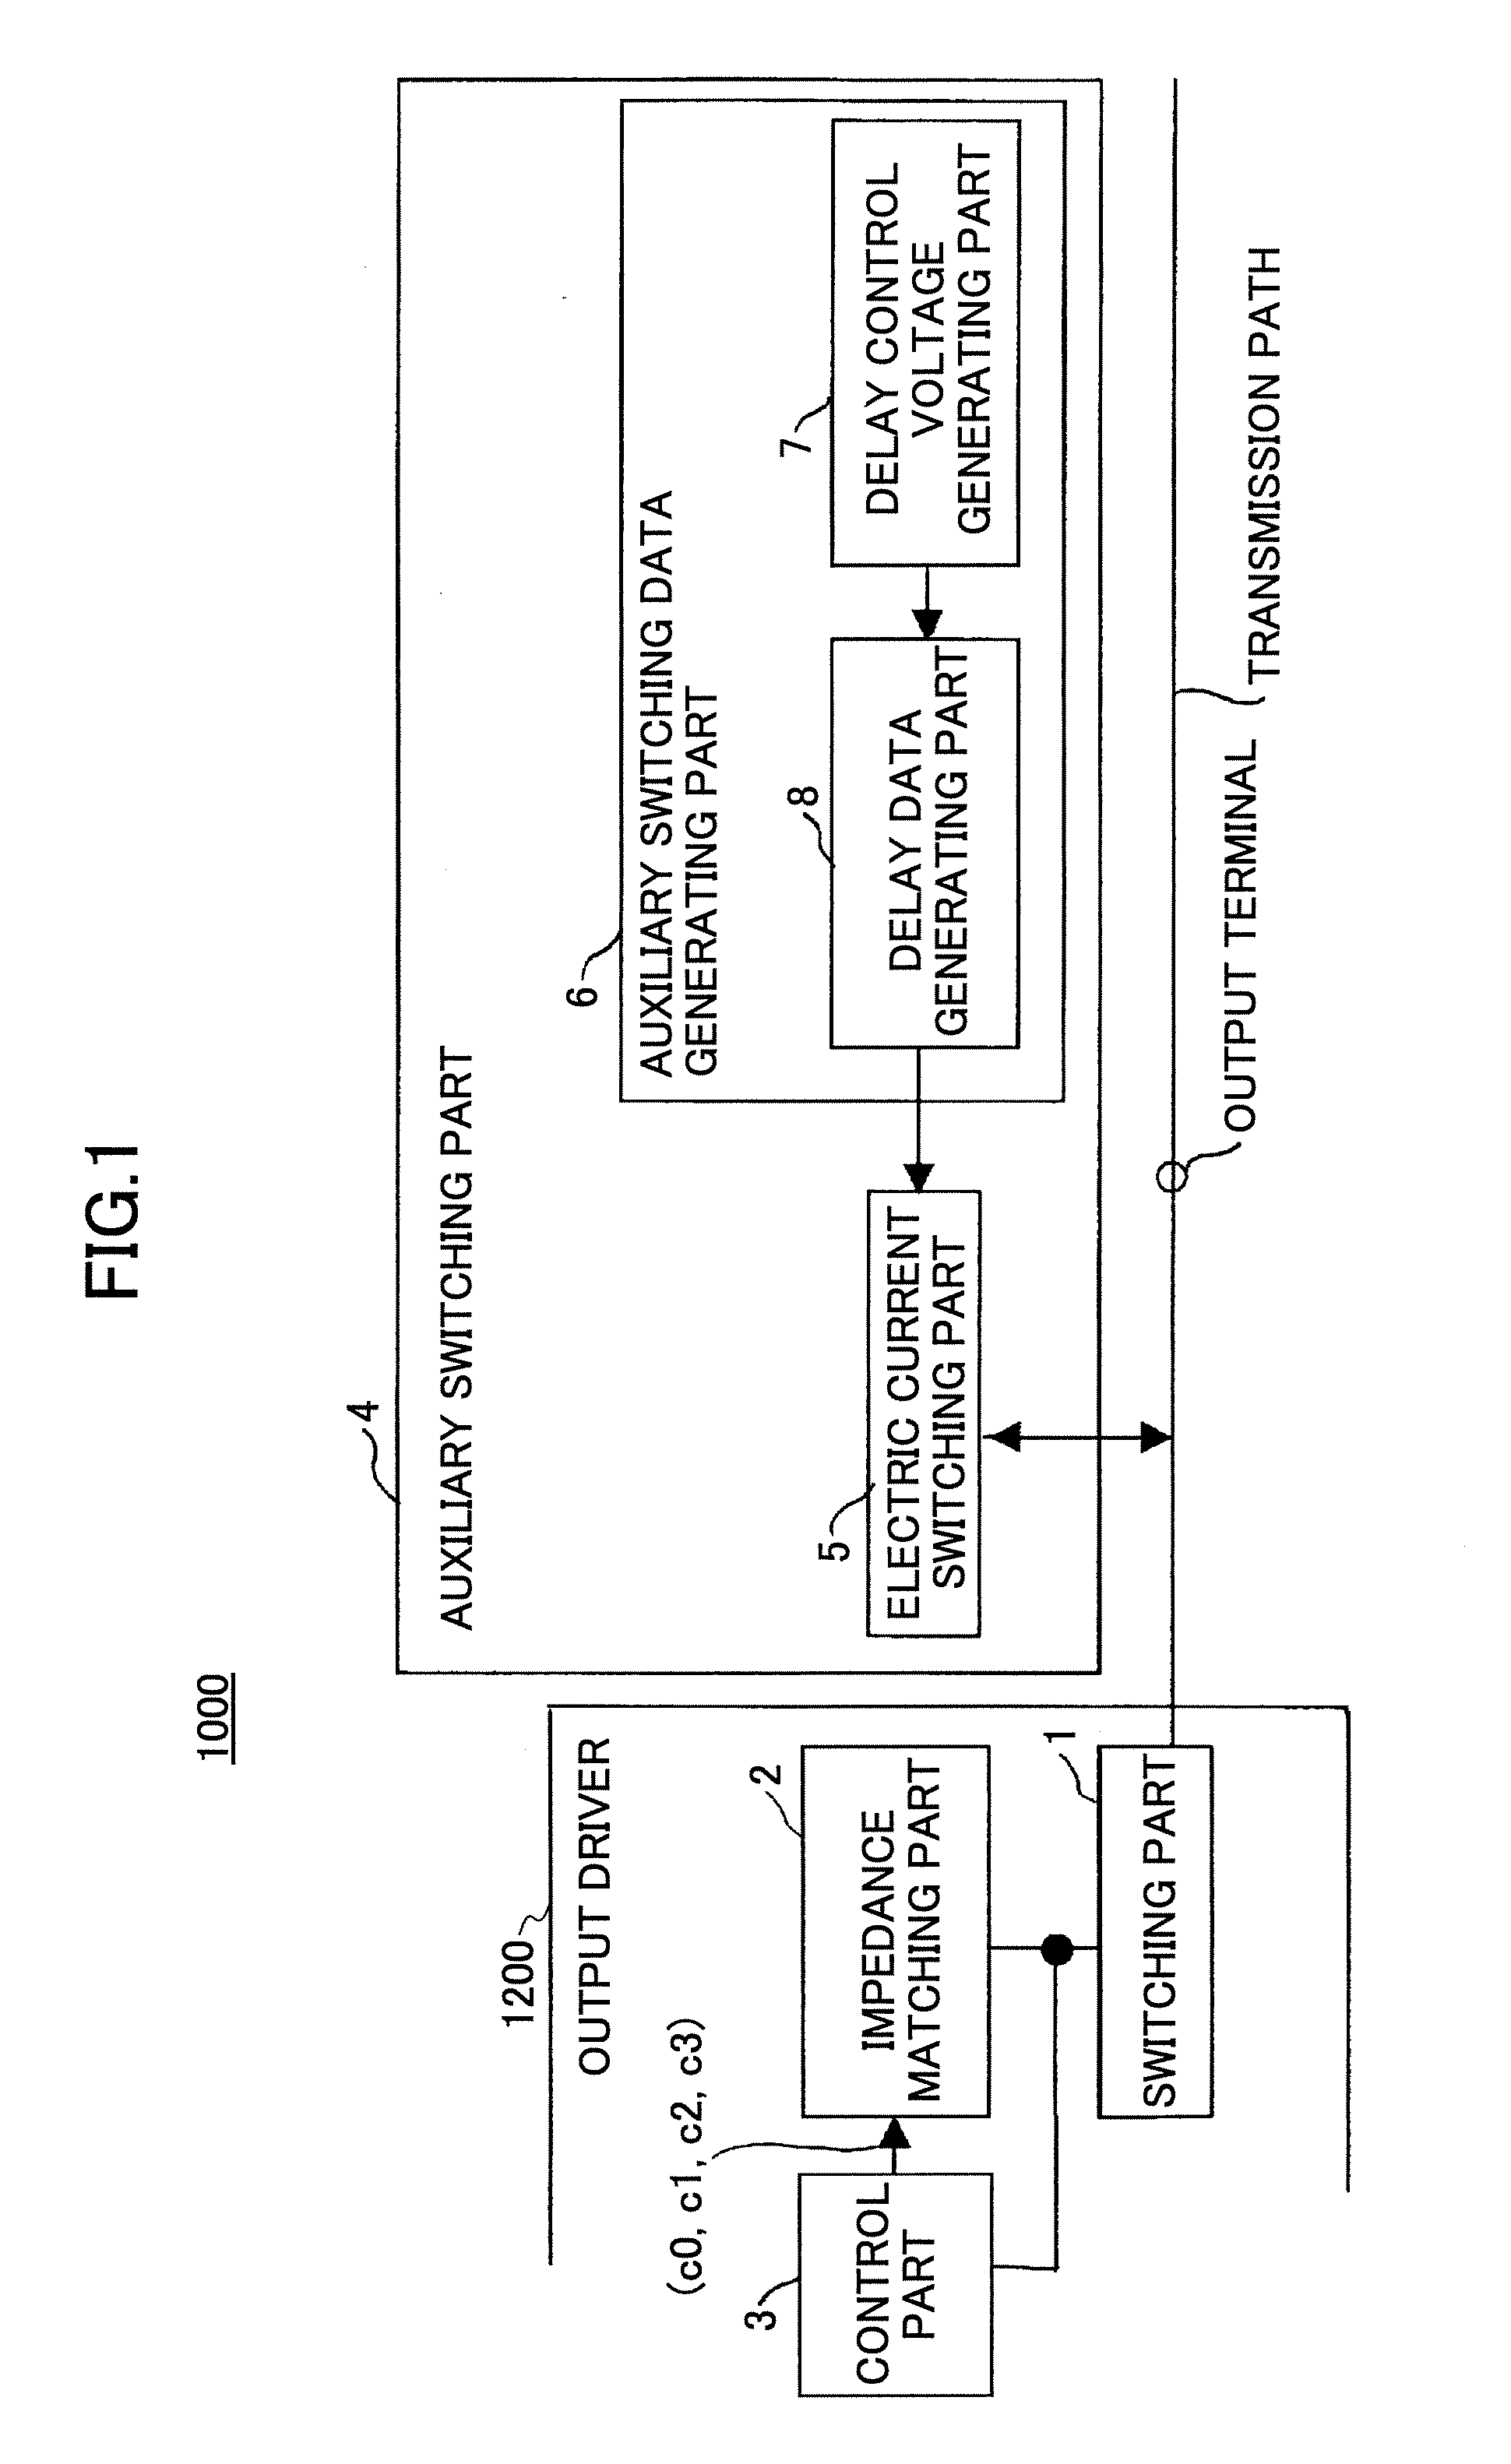 Electric signal outputting apparatus, semiconductor laser modulation driving apparatus, and image forming apparatus